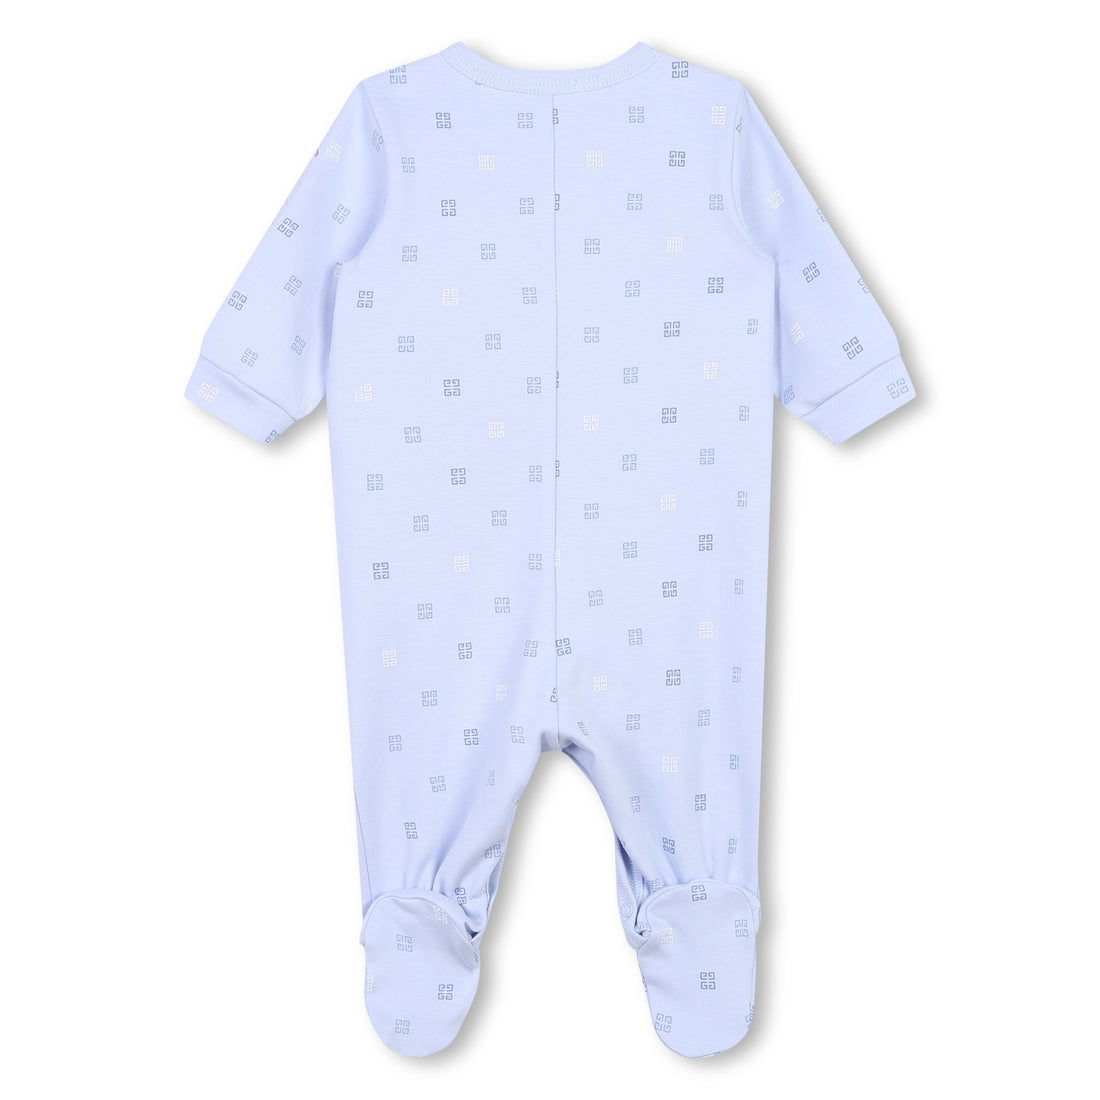 Givenchy Baby Pyjamas Pale Blue - Soft and Cozy Sleepwear | Schools Out